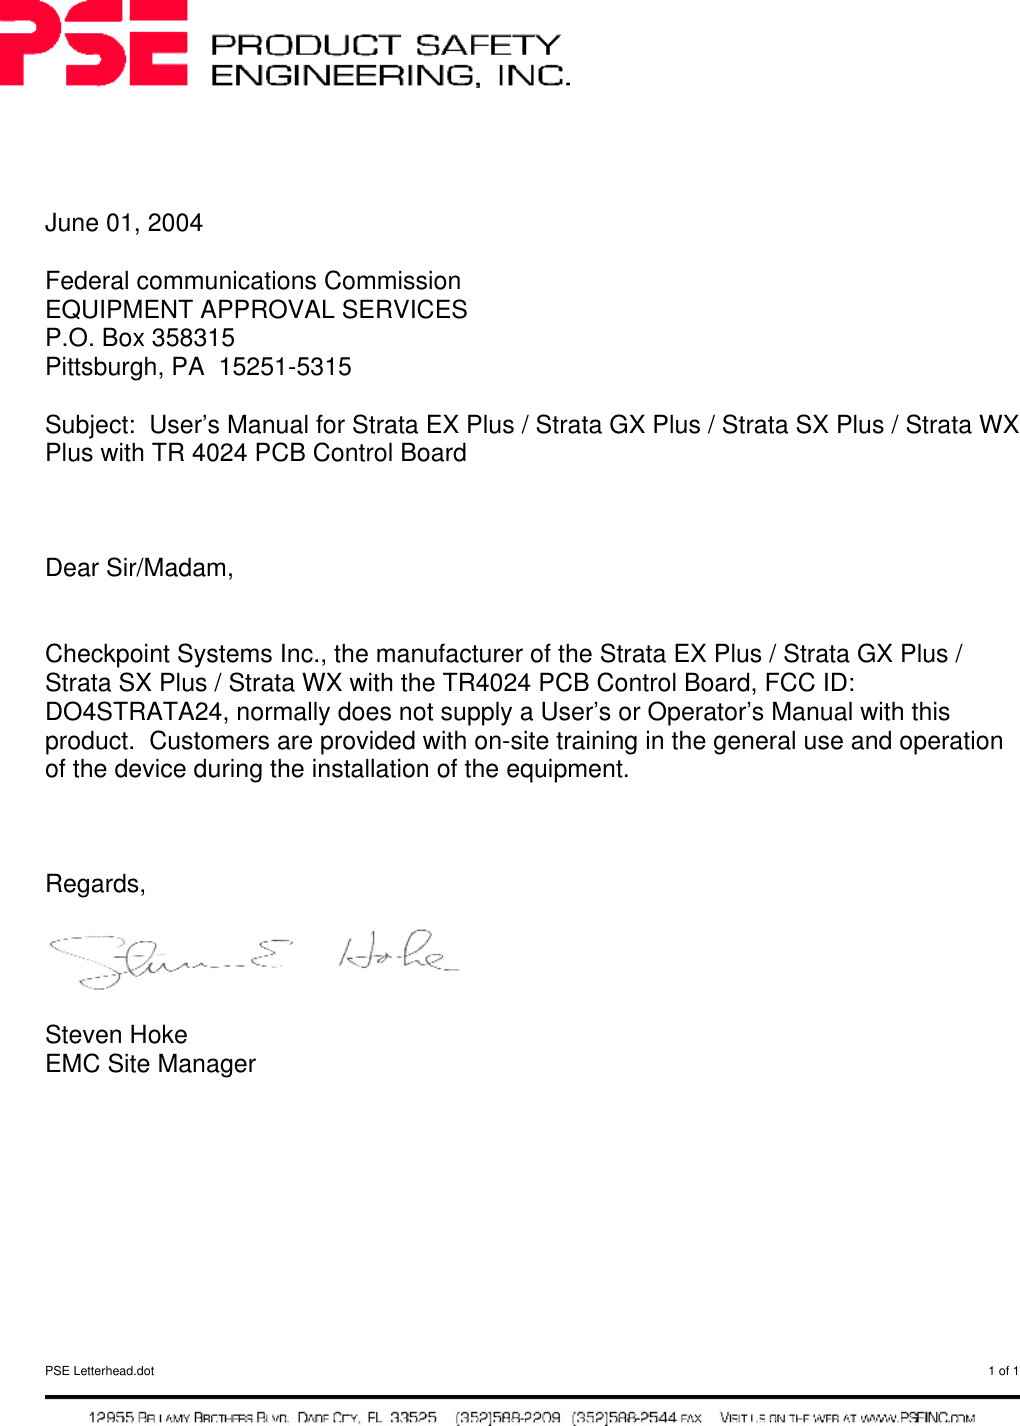  PSE Letterhead.dot  1 of 1       June 01, 2004  Federal communications Commission EQUIPMENT APPROVAL SERVICES P.O. Box 358315 Pittsburgh, PA  15251-5315  Subject:  User’s Manual for Strata EX Plus / Strata GX Plus / Strata SX Plus / Strata WX Plus with TR 4024 PCB Control Board    Dear Sir/Madam,   Checkpoint Systems Inc., the manufacturer of the Strata EX Plus / Strata GX Plus / Strata SX Plus / Strata WX with the TR4024 PCB Control Board, FCC ID: DO4STRATA24, normally does not supply a User’s or Operator’s Manual with this product.  Customers are provided with on-site training in the general use and operation of the device during the installation of the equipment.     Regards,    Steven Hoke EMC Site Manager     